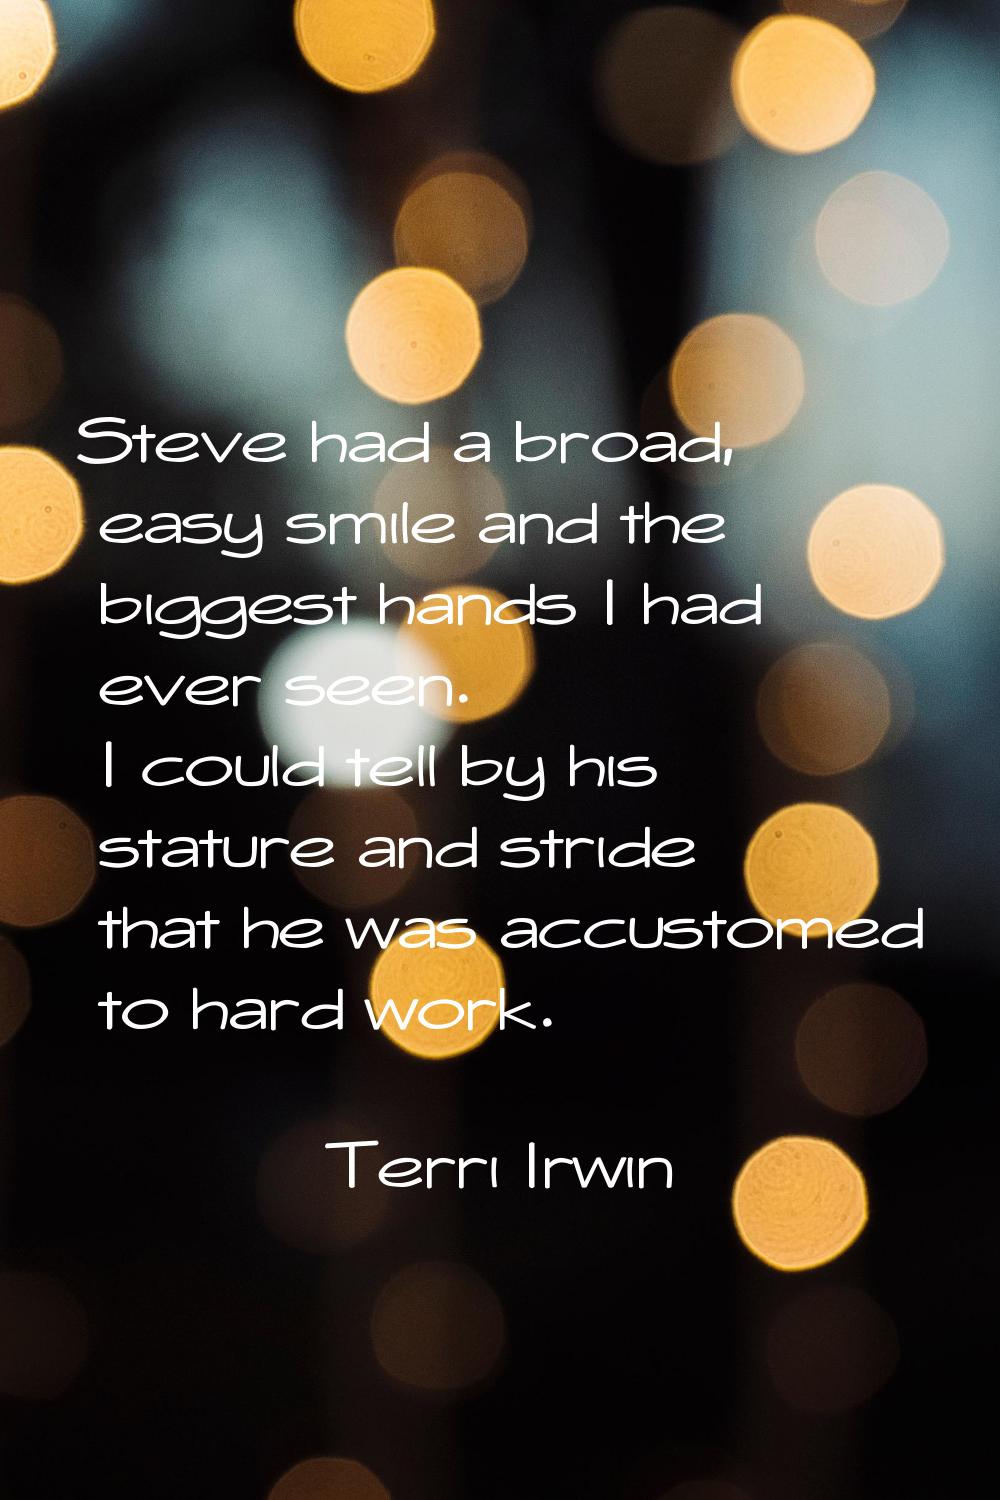 Steve had a broad, easy smile and the biggest hands I had ever seen. I could tell by his stature an